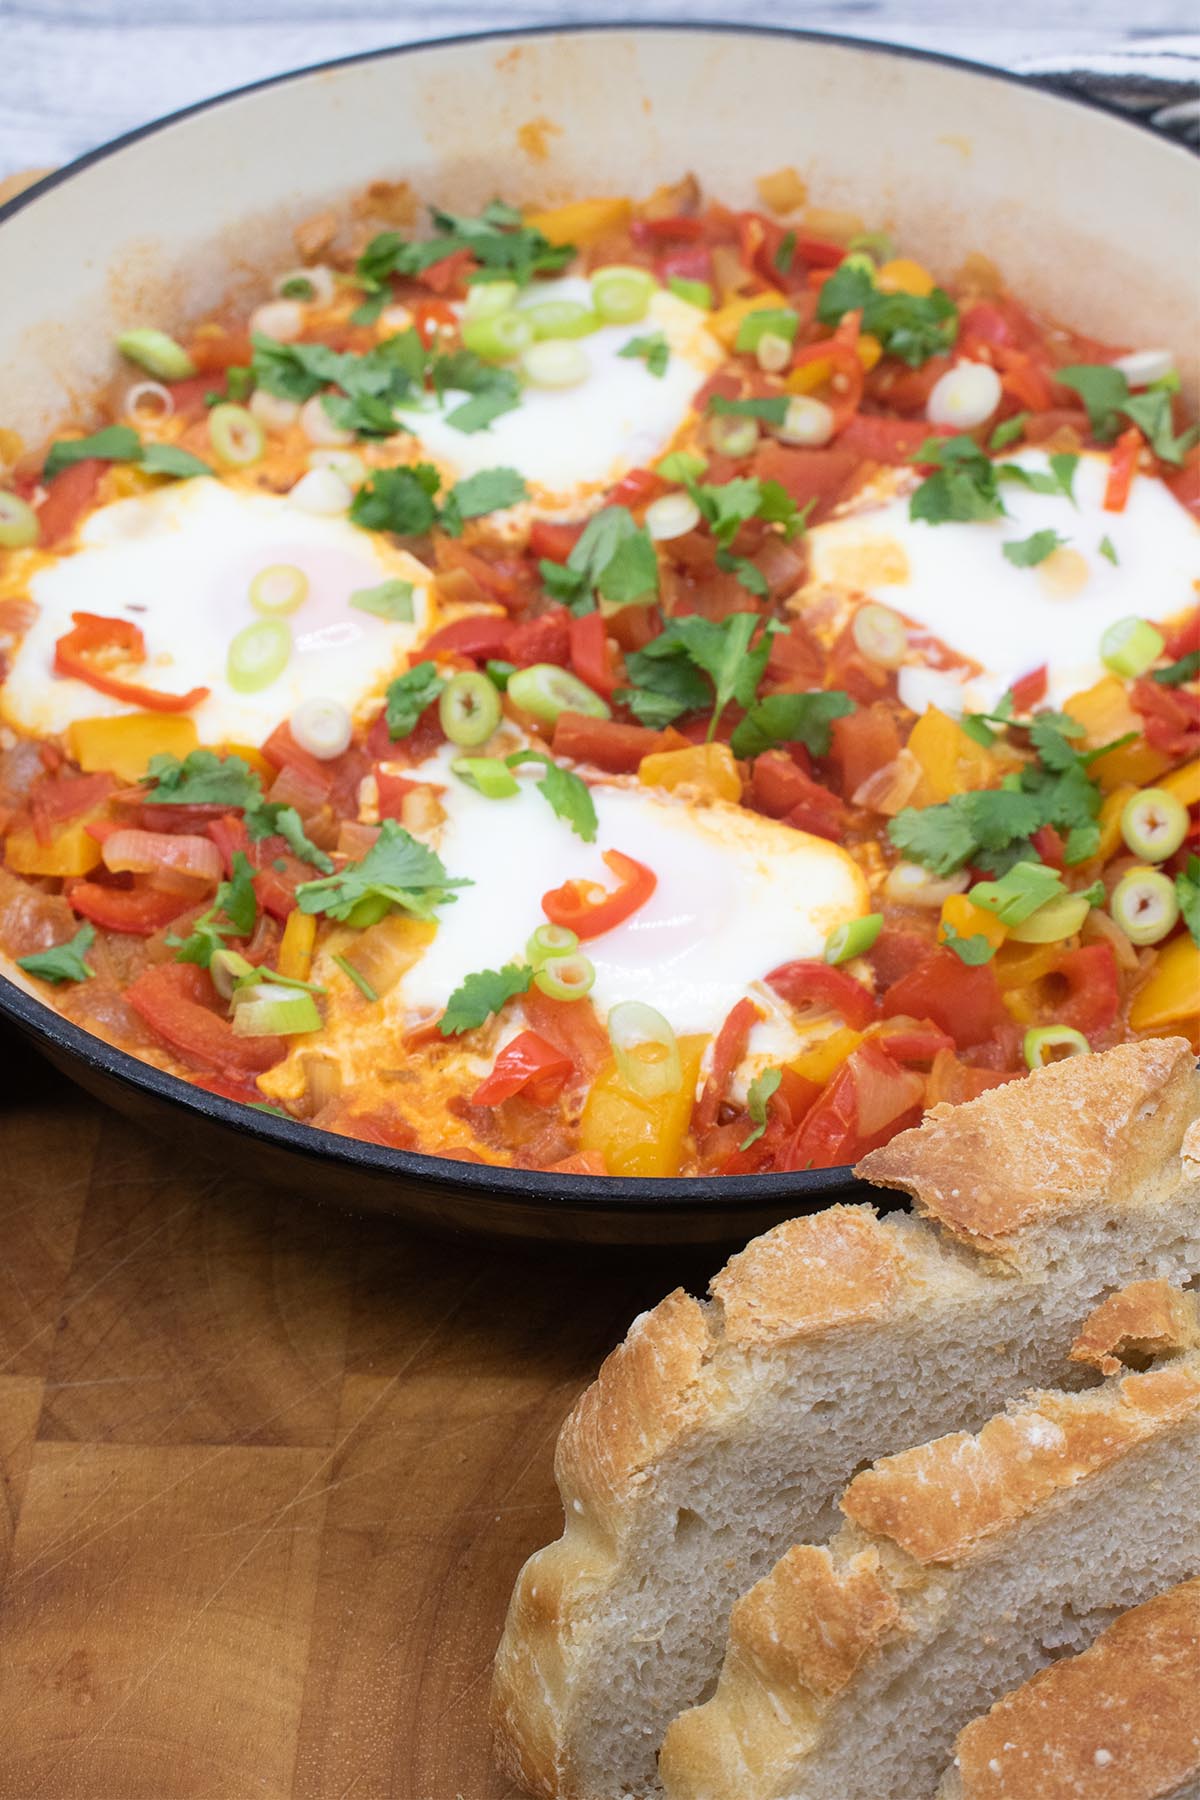 Eggs in a tomato and pepper sauce in a large round casserole with bread at side